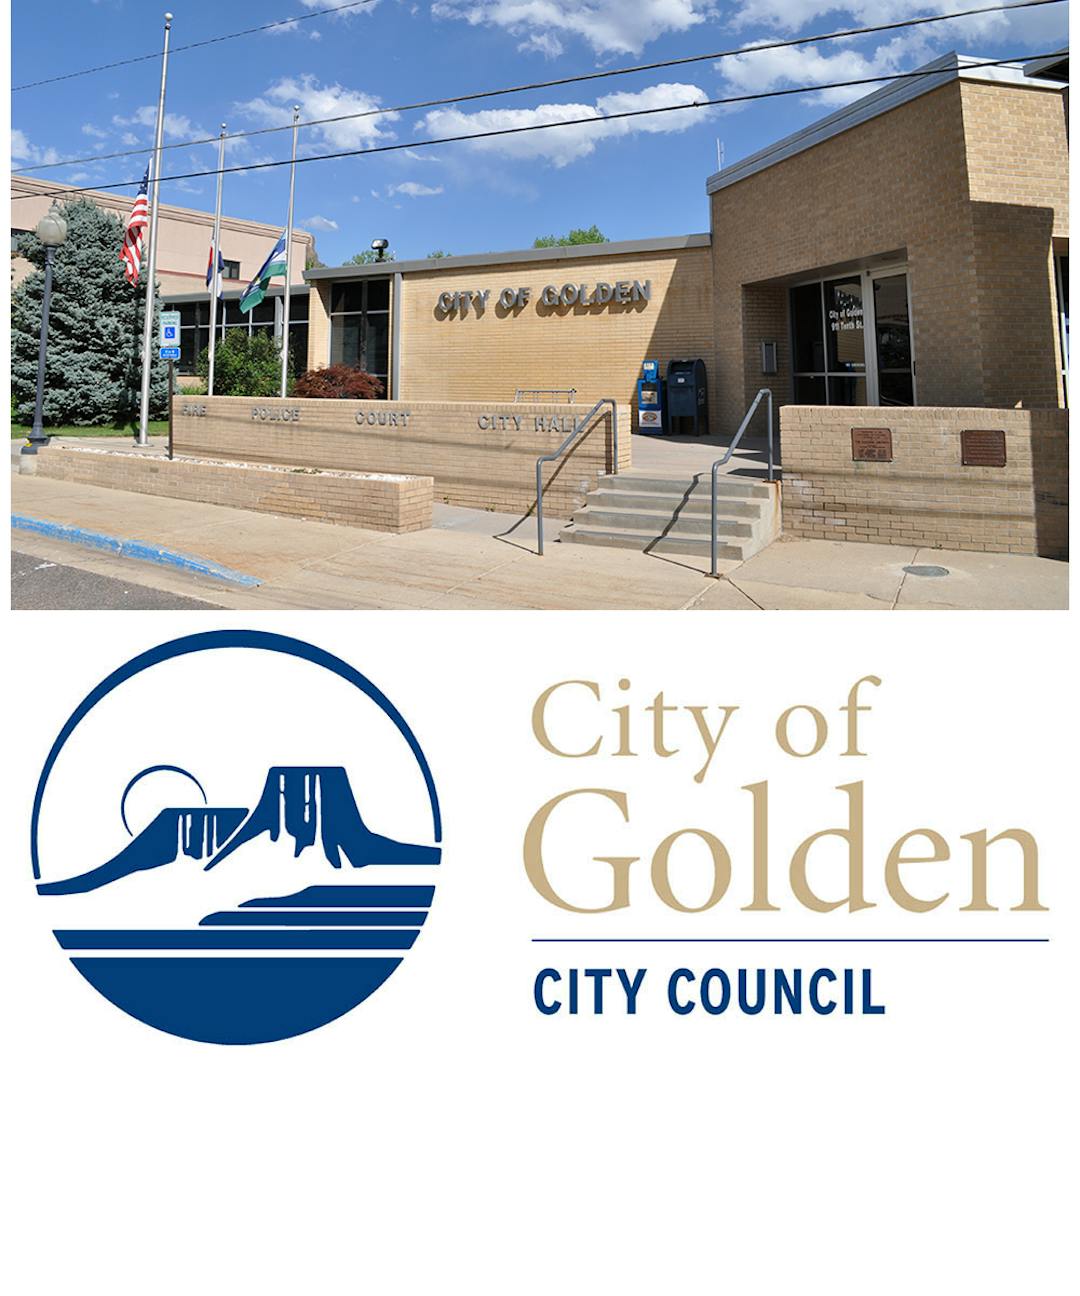 Front view of Golden City Hall over city logo